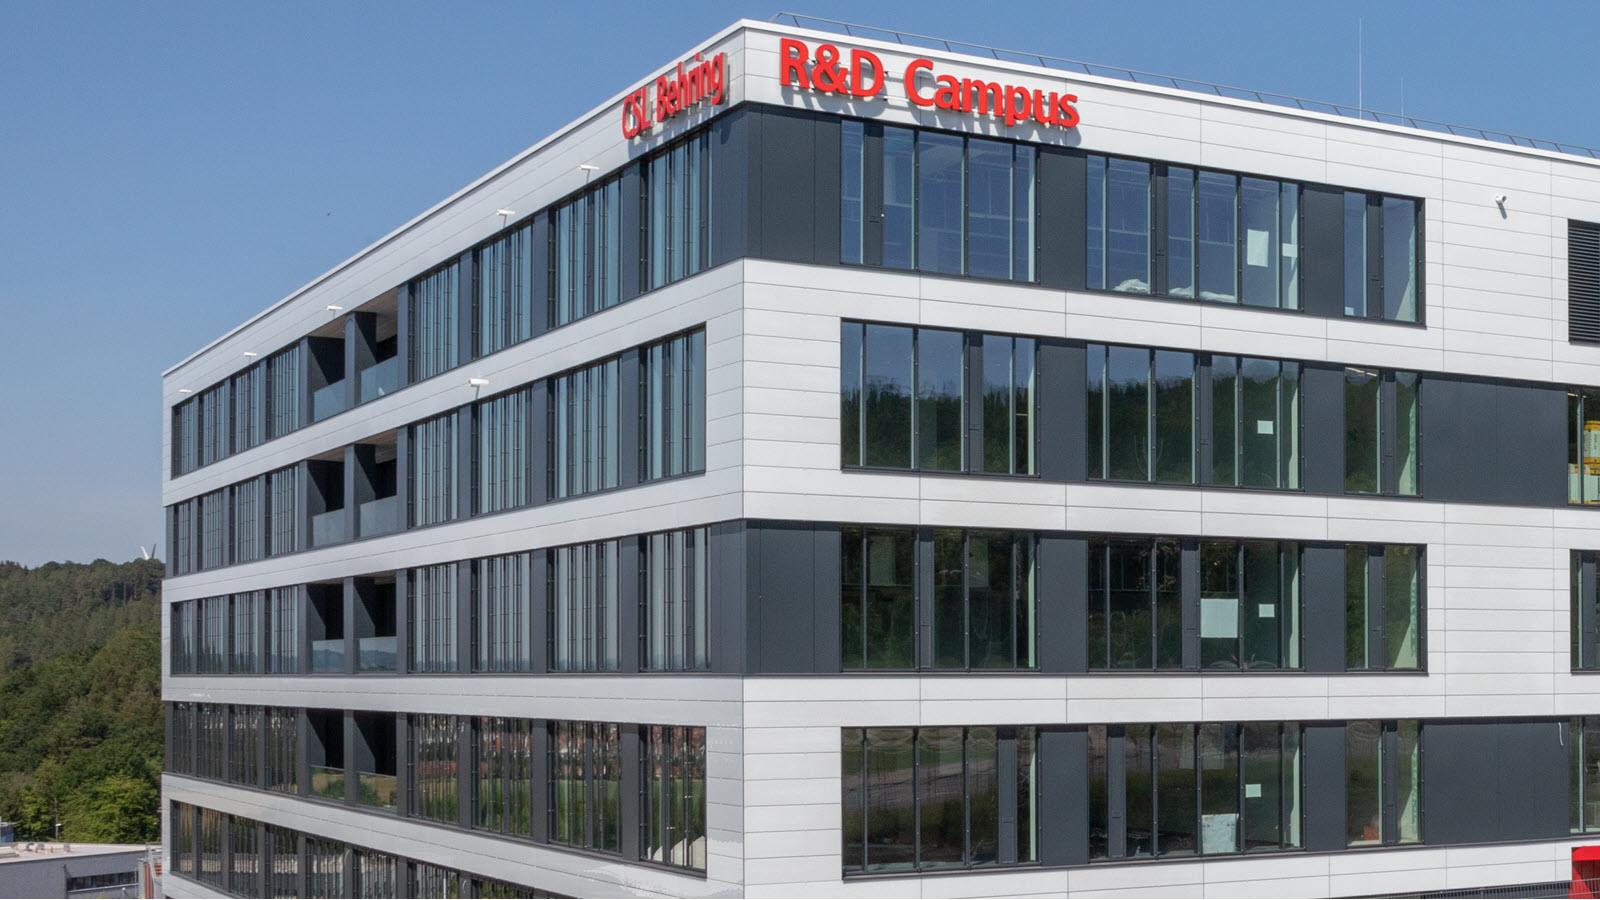 Exterior of CSL's new R&D building in Marburg, Germany. Red letters say CSL Behring R&D Campus